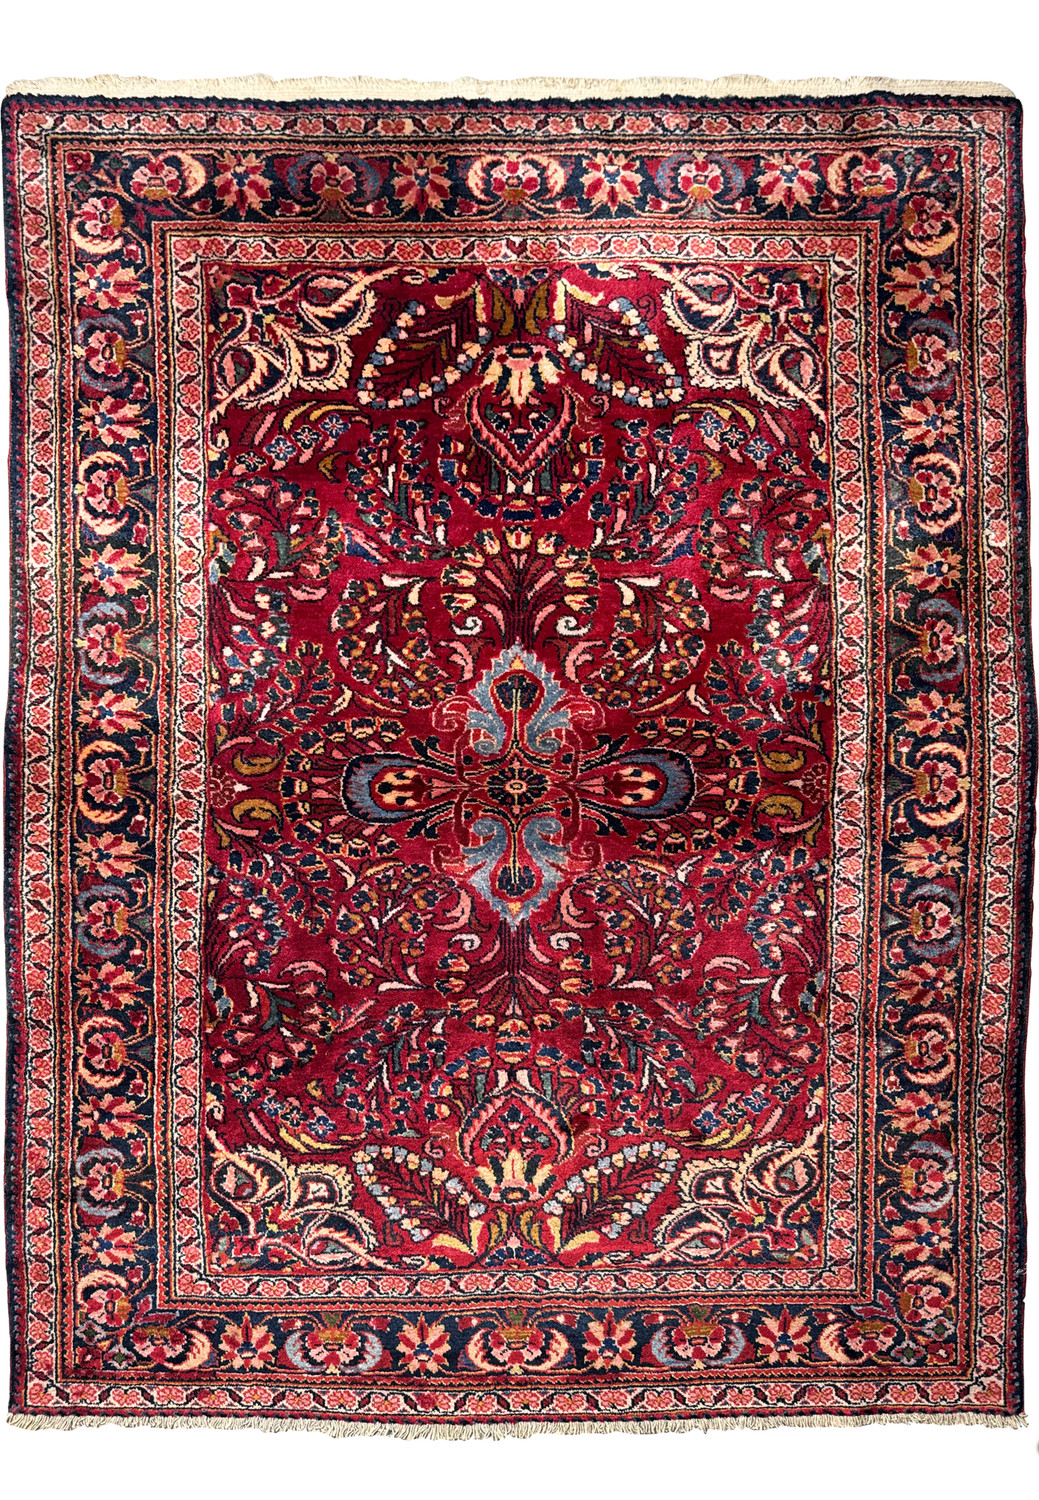 Close view of a 4x6 Antique Persian Lilihan Rug showcasing the detailed central medallion and rich red field.